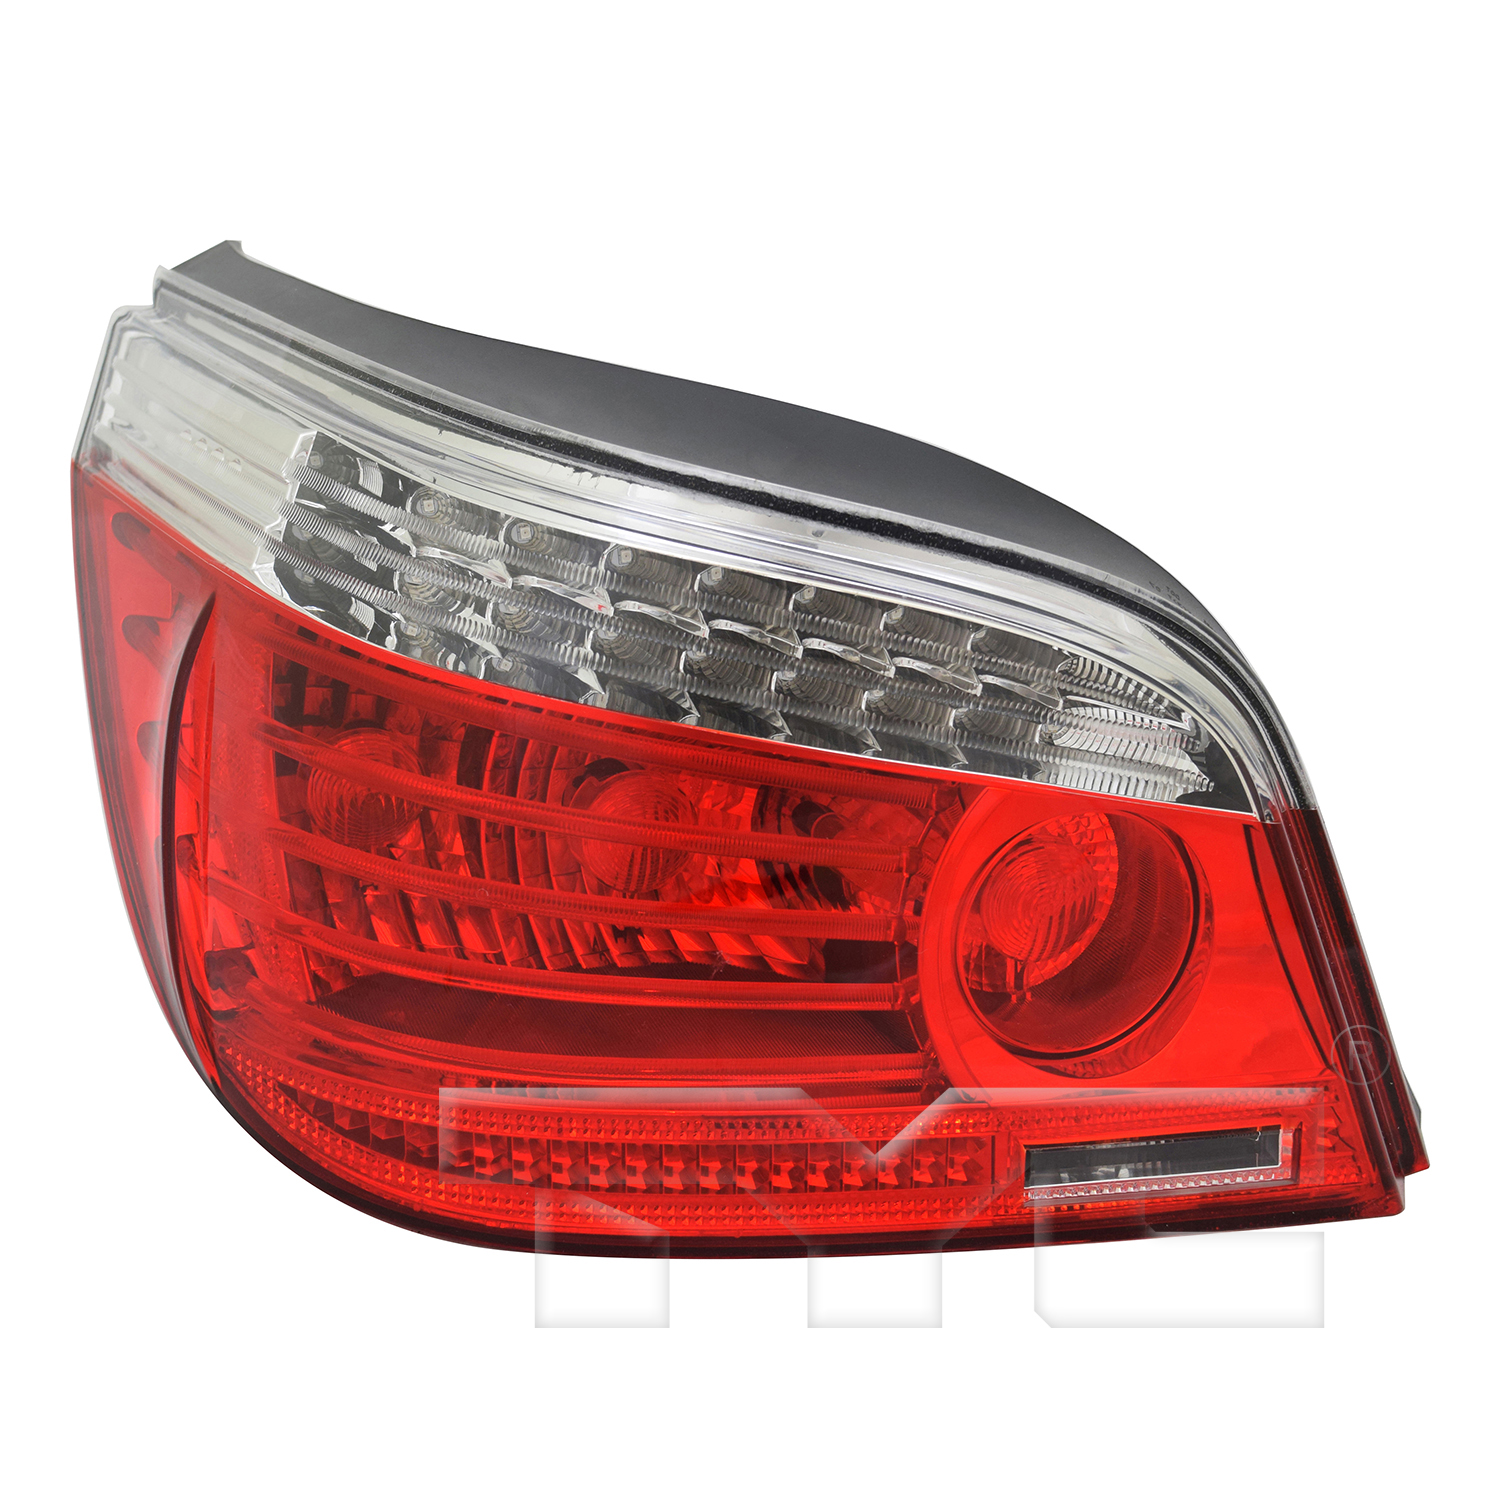 Aftermarket TAILLIGHTS for BMW - 550I, 550i,08-10,LT Taillamp assy